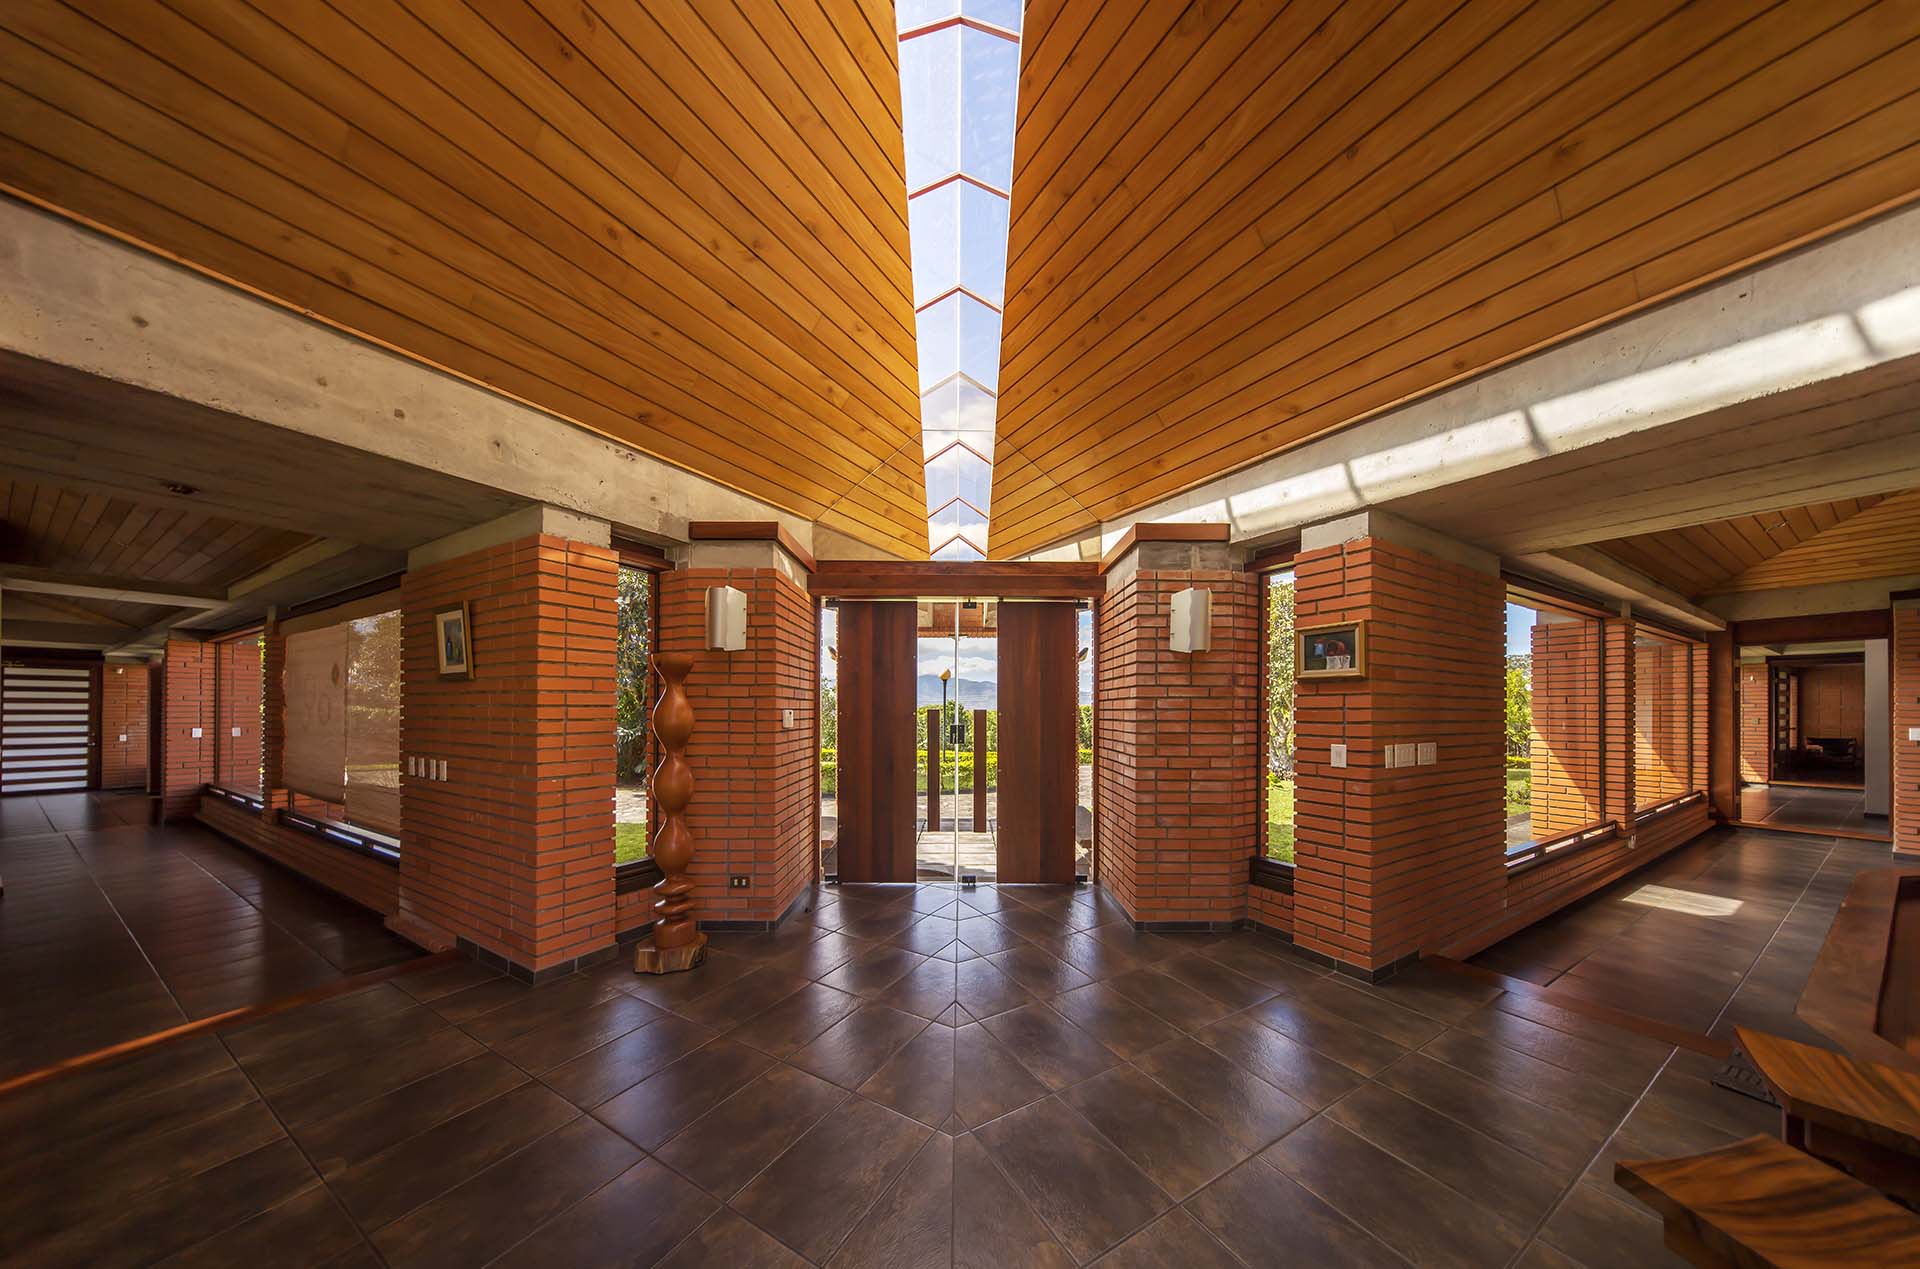 ymmetrical view from within the Soto House lobby, looking towards the main entrance door, with extended views down the wing hallways. The entrance doors, a mix of tempered glass and solid wood, appear as a floating wood panel under the skylight. Notable features include heavy brick columns, wooden ceilings, and concrete beams - a showcase of Costa Rican architecture